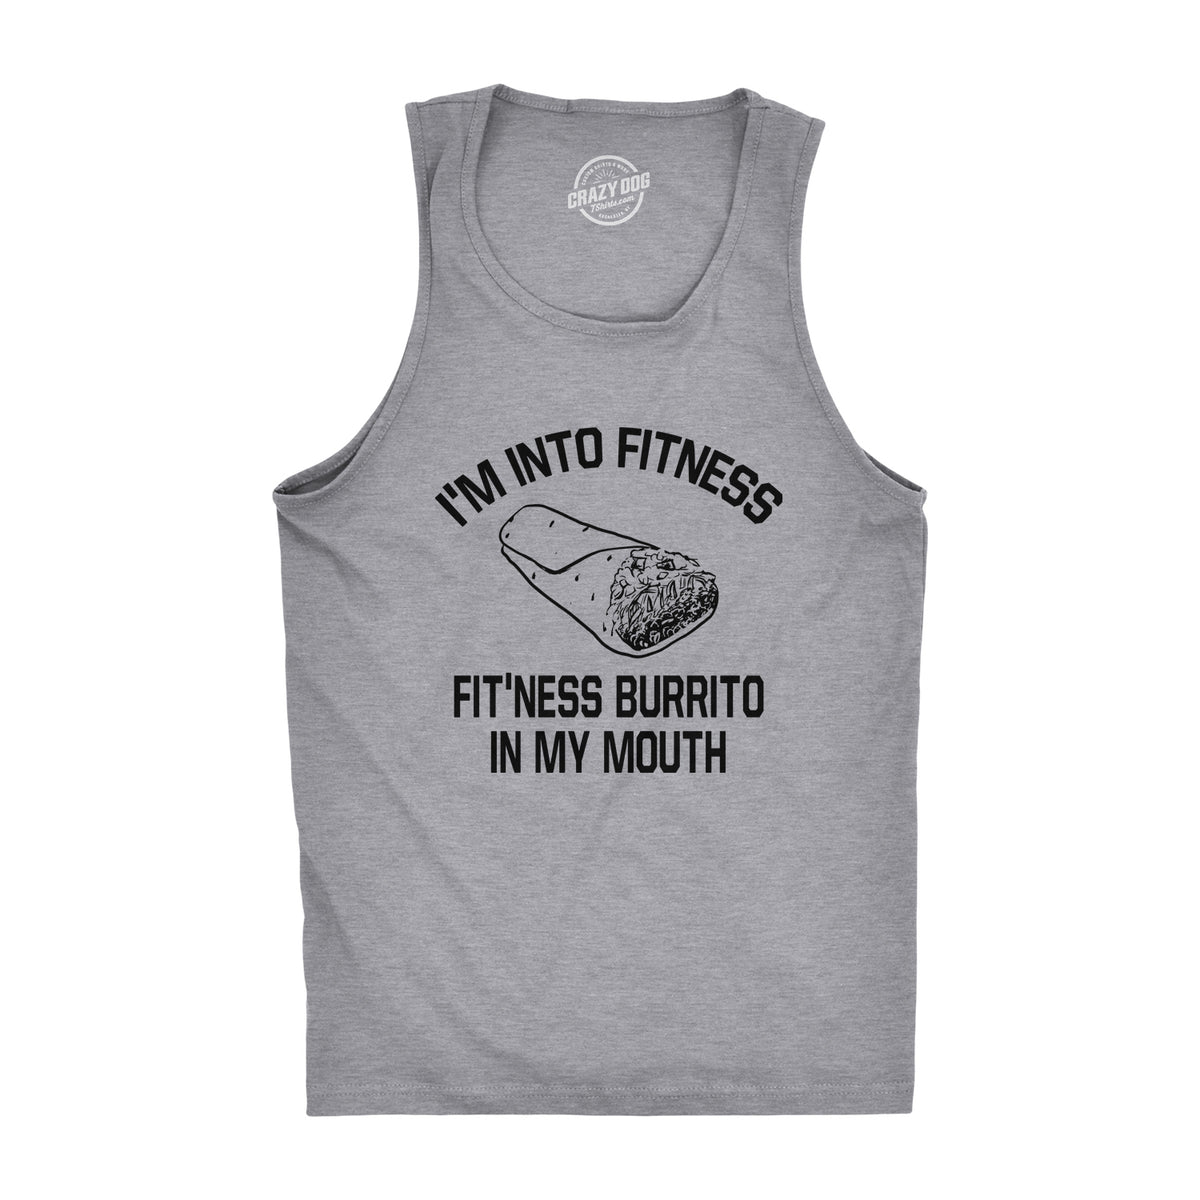 Funny Light Heather Grey Fitness Burrito In My Mouth Mens Tank Top Nerdy Cinco De Mayo Fitness Food Sarcastic Tee